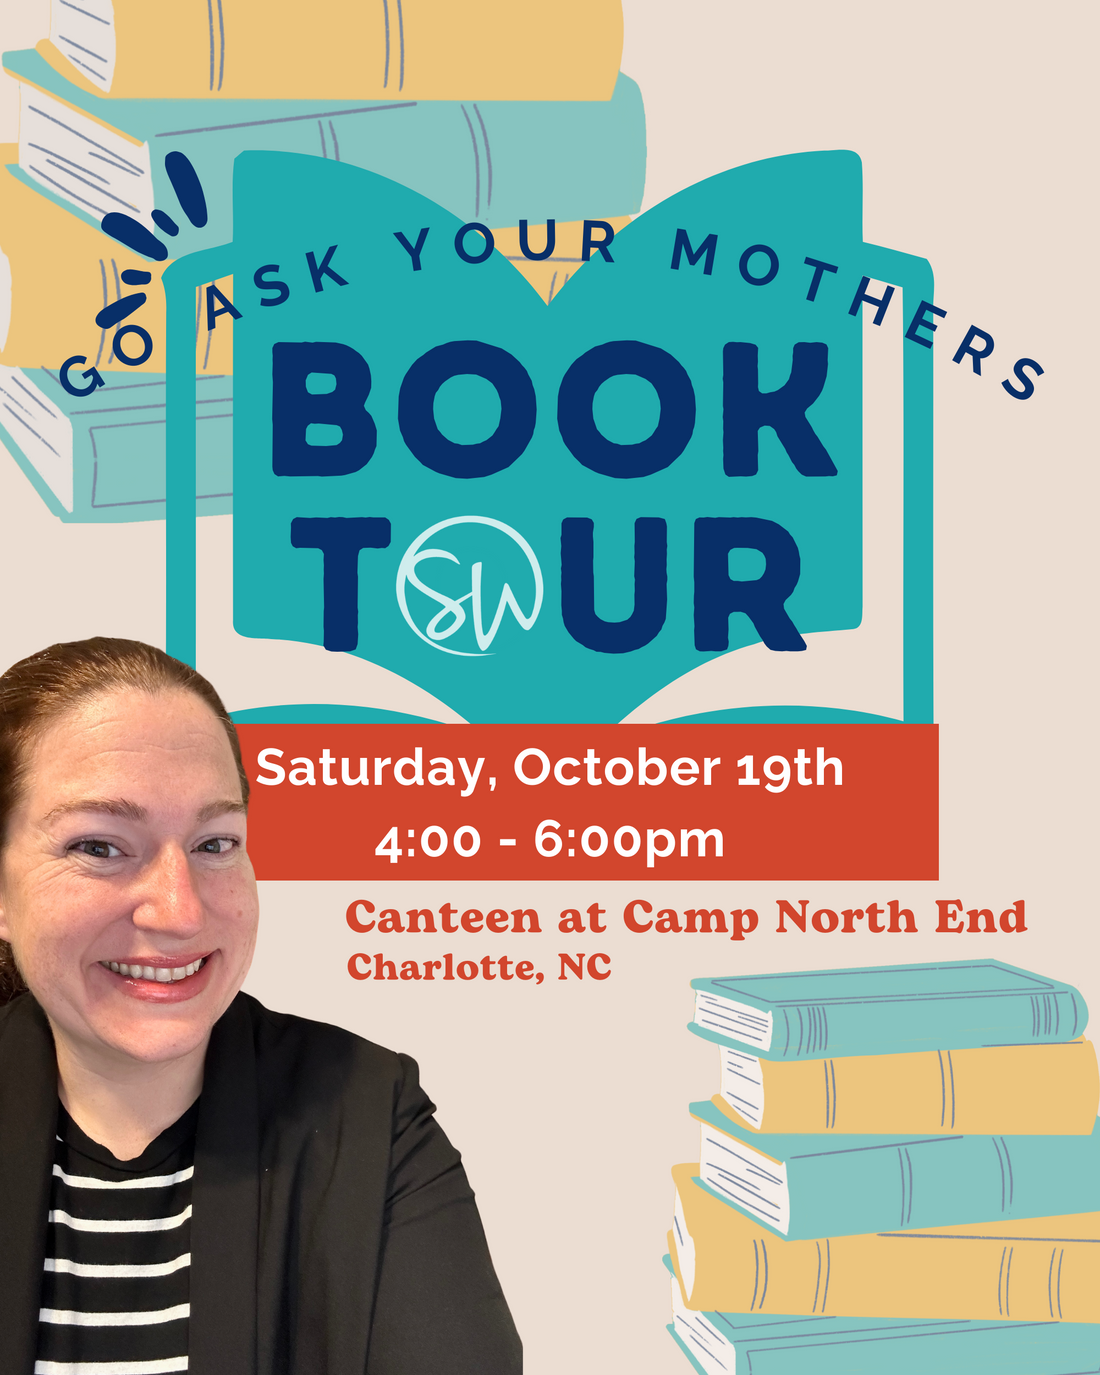 Go Ask Your Mothers w/Sarah Wells - Book Tour 2024 - Charlotte, NC - FREE Ticket